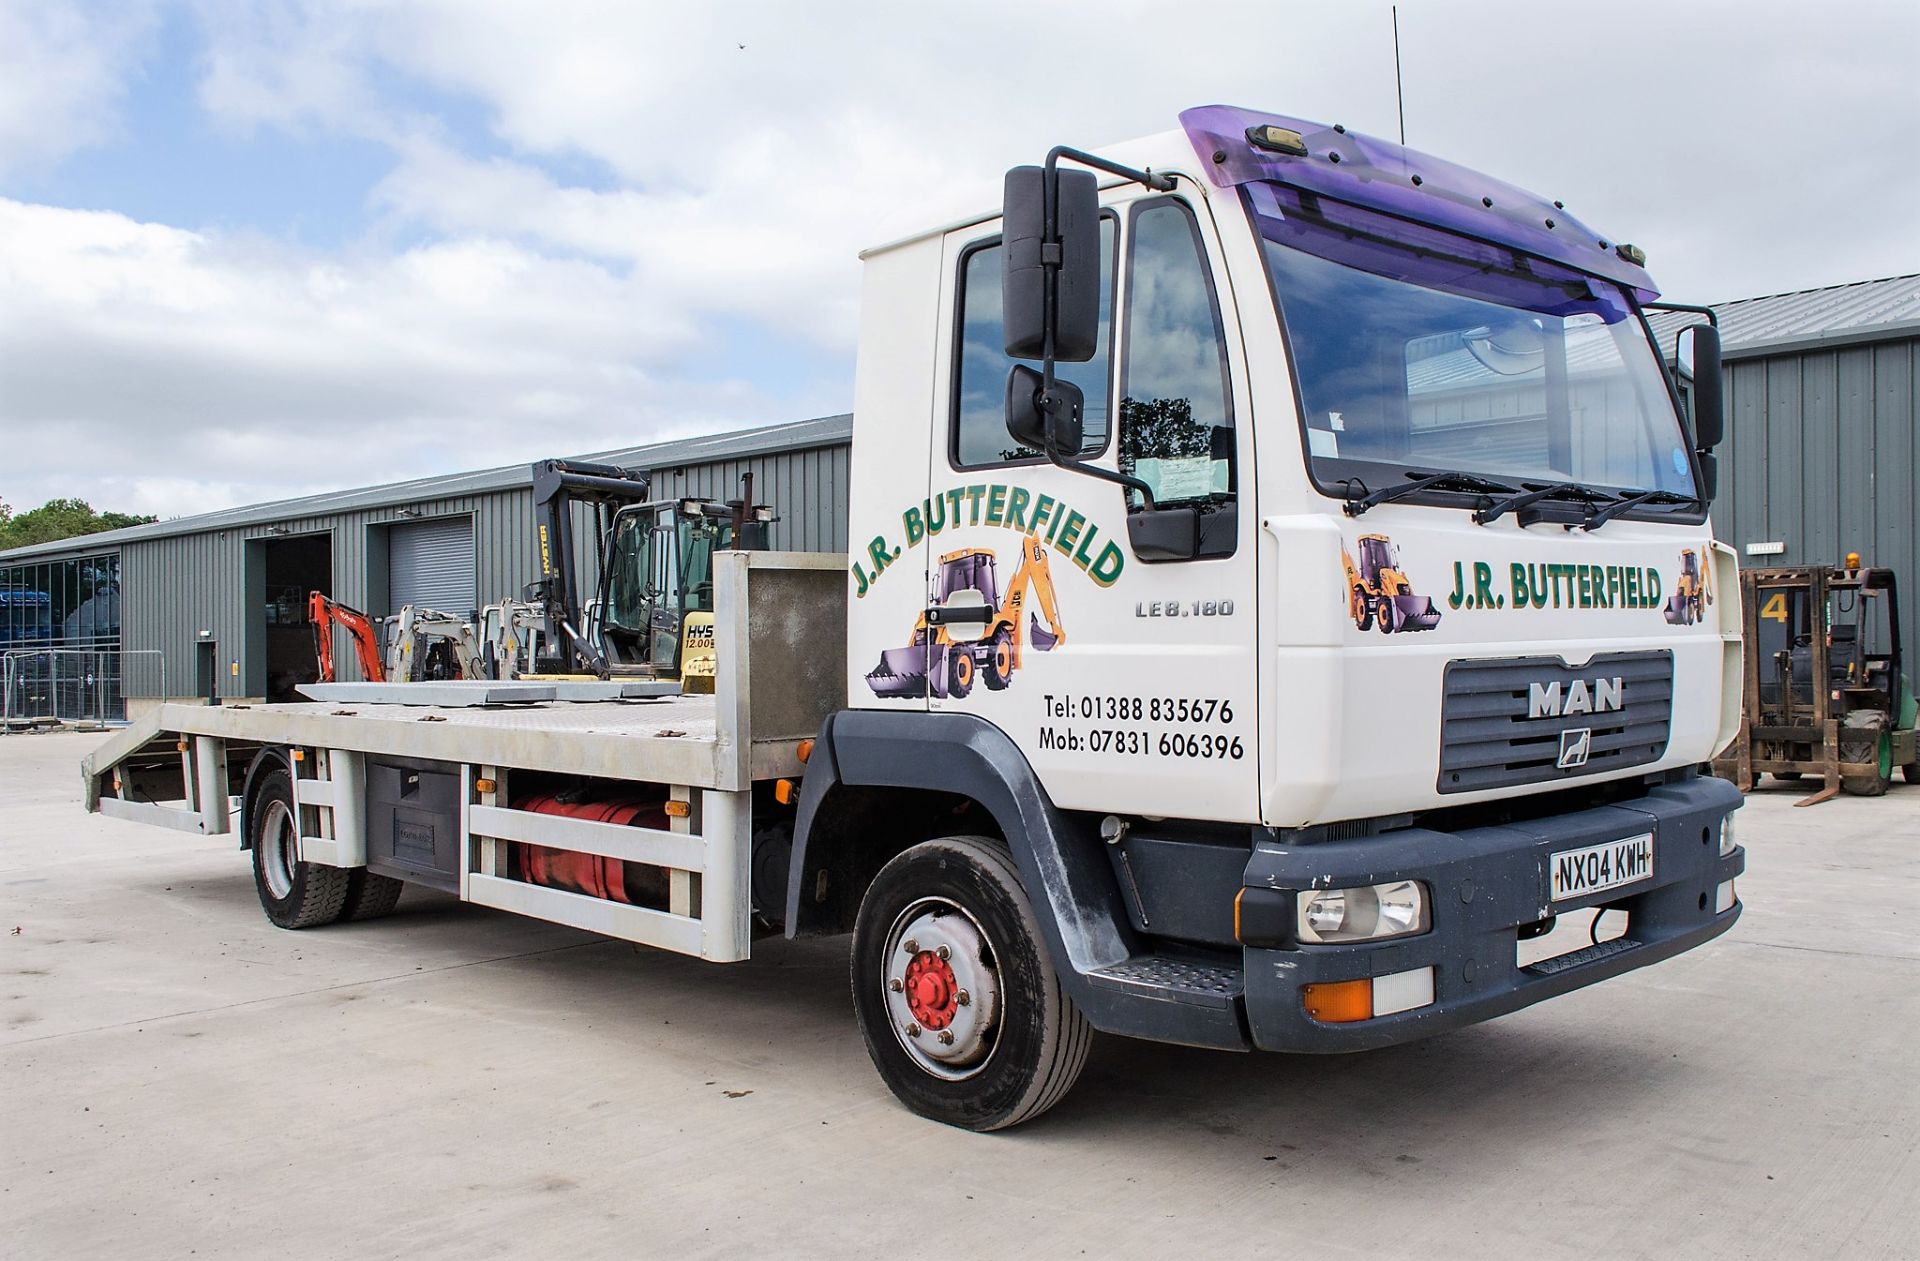 MAN LE8.180 4 x 2 7.5 tonne beaver tail plant lorry  Registration Number: NX04 KWH Date of - Image 2 of 20